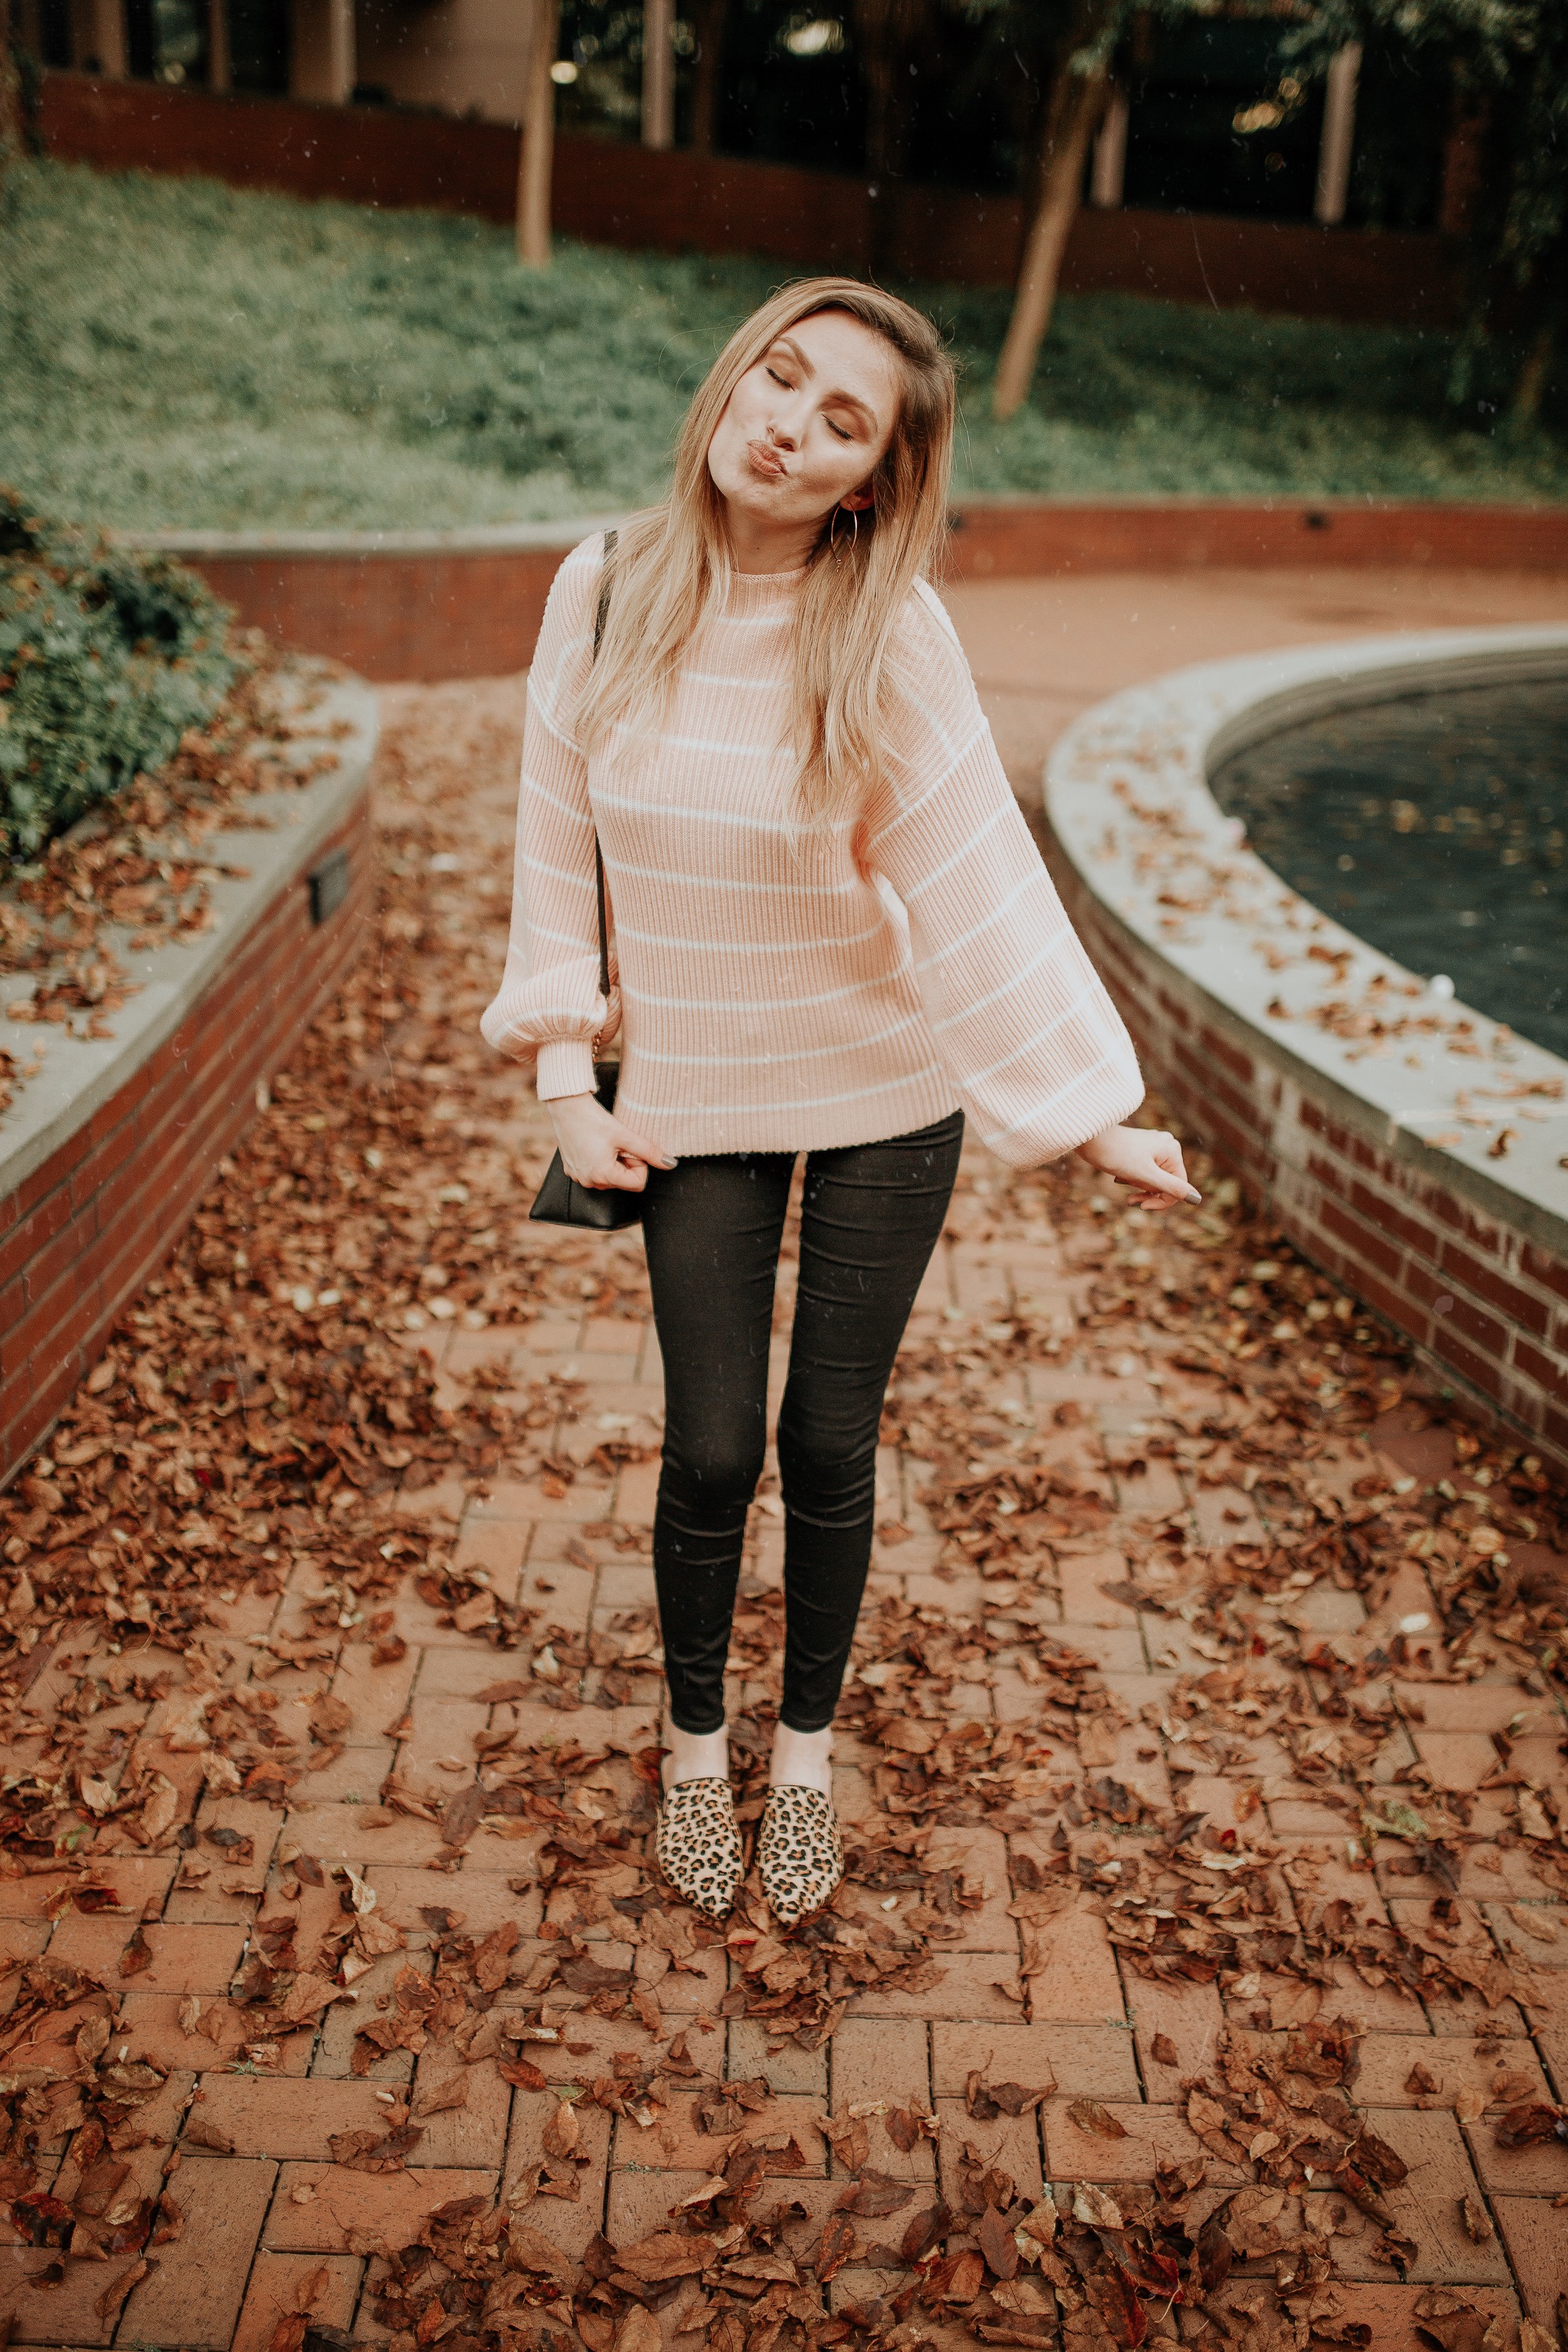 Trendy Women's Sweaters 2018 | Fall & Winter Sweaters Under $100 by North Carolina fashion and lifestyle blogger Jessica Linn